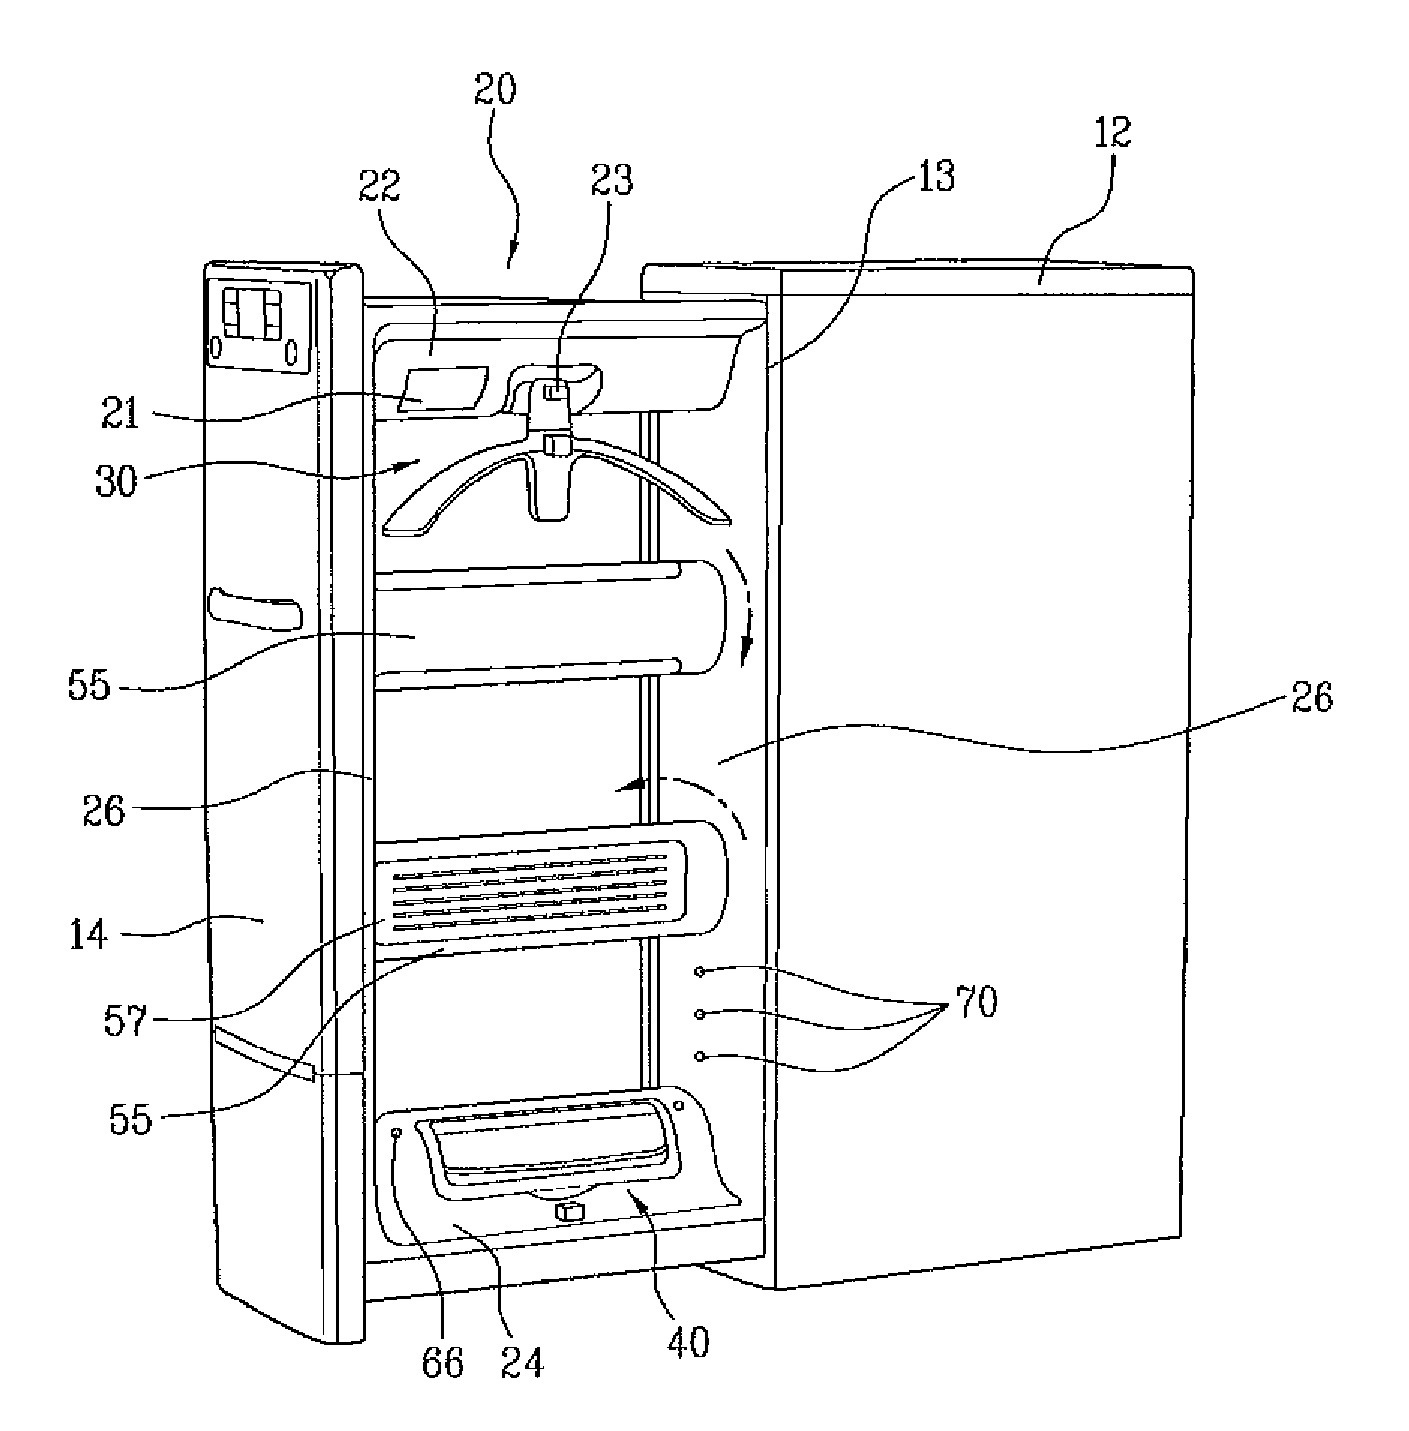 Supplemental clothes treating apparatus